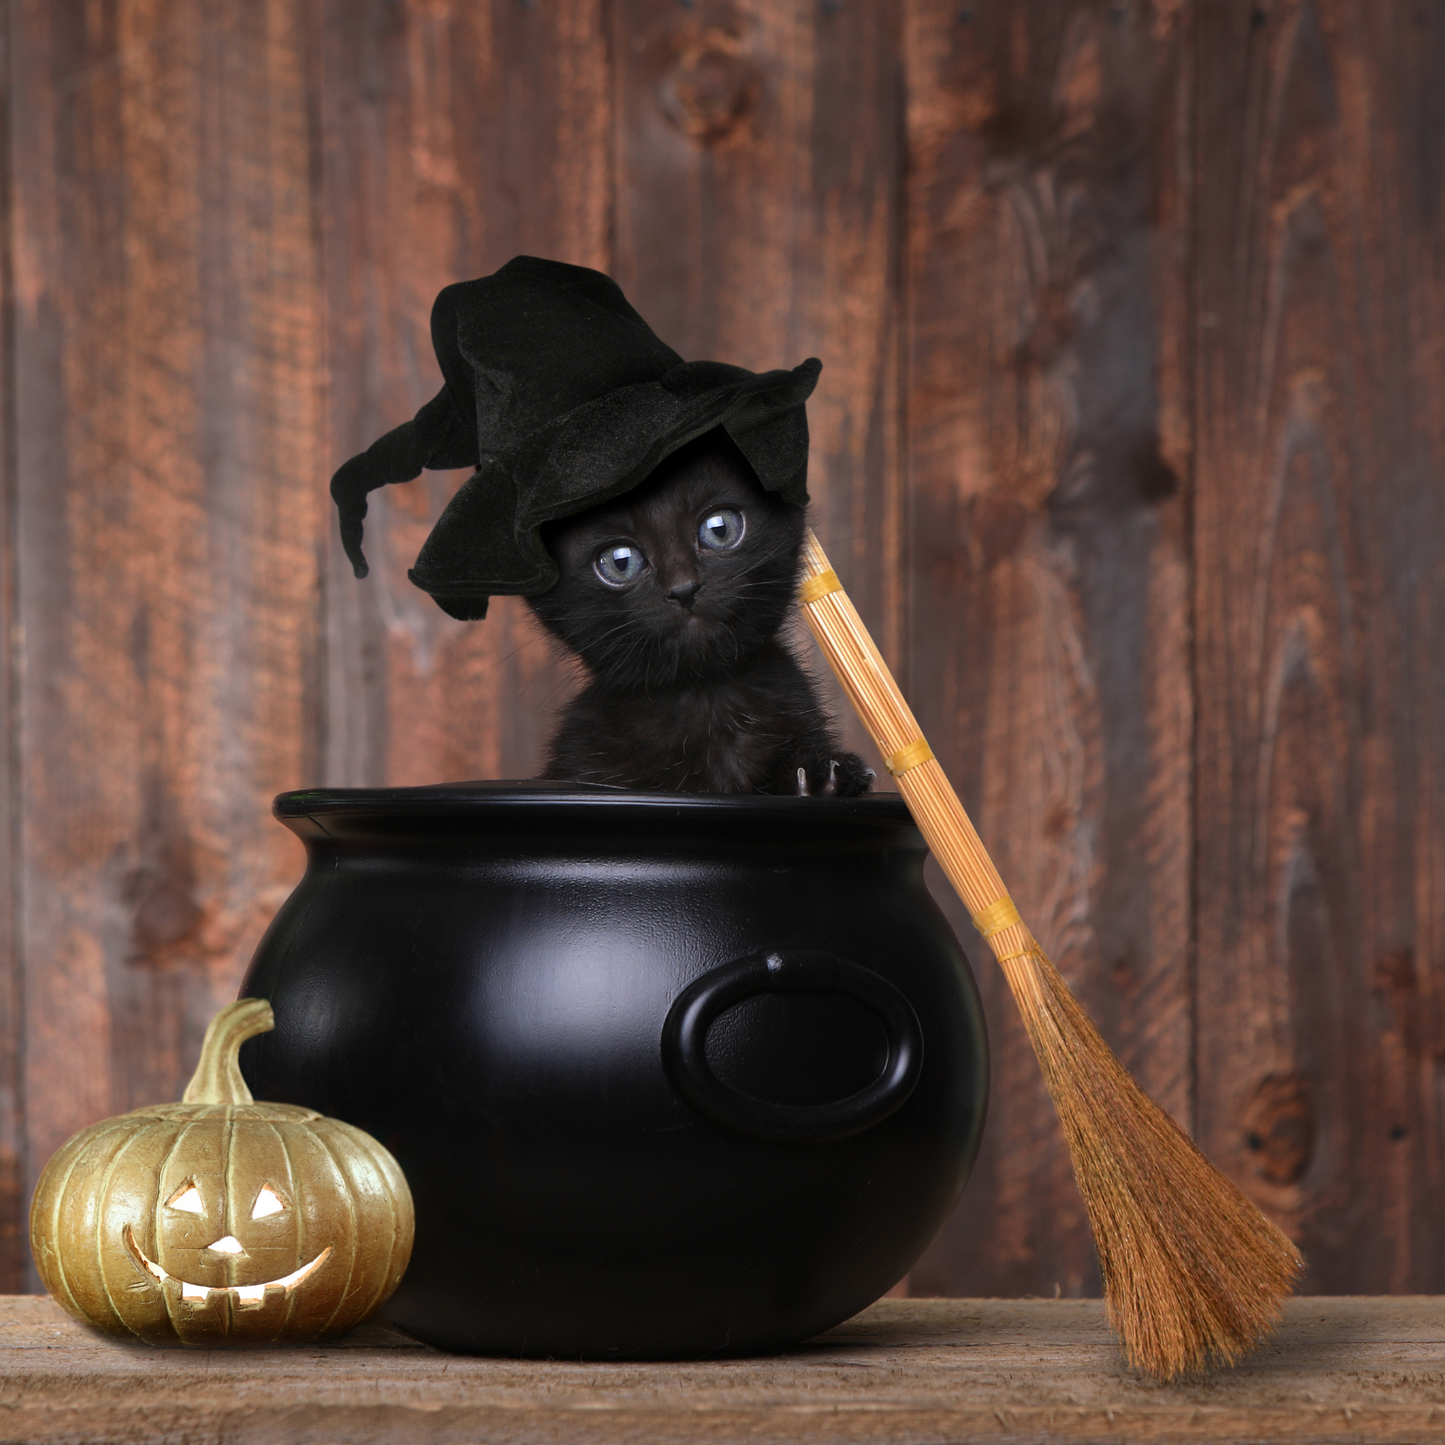 Witchy Pooh's Put A Spell On You Loose Leaf Licorice Peppermint Herbal Tea with Candy Black Cats, Caffeine Free-7